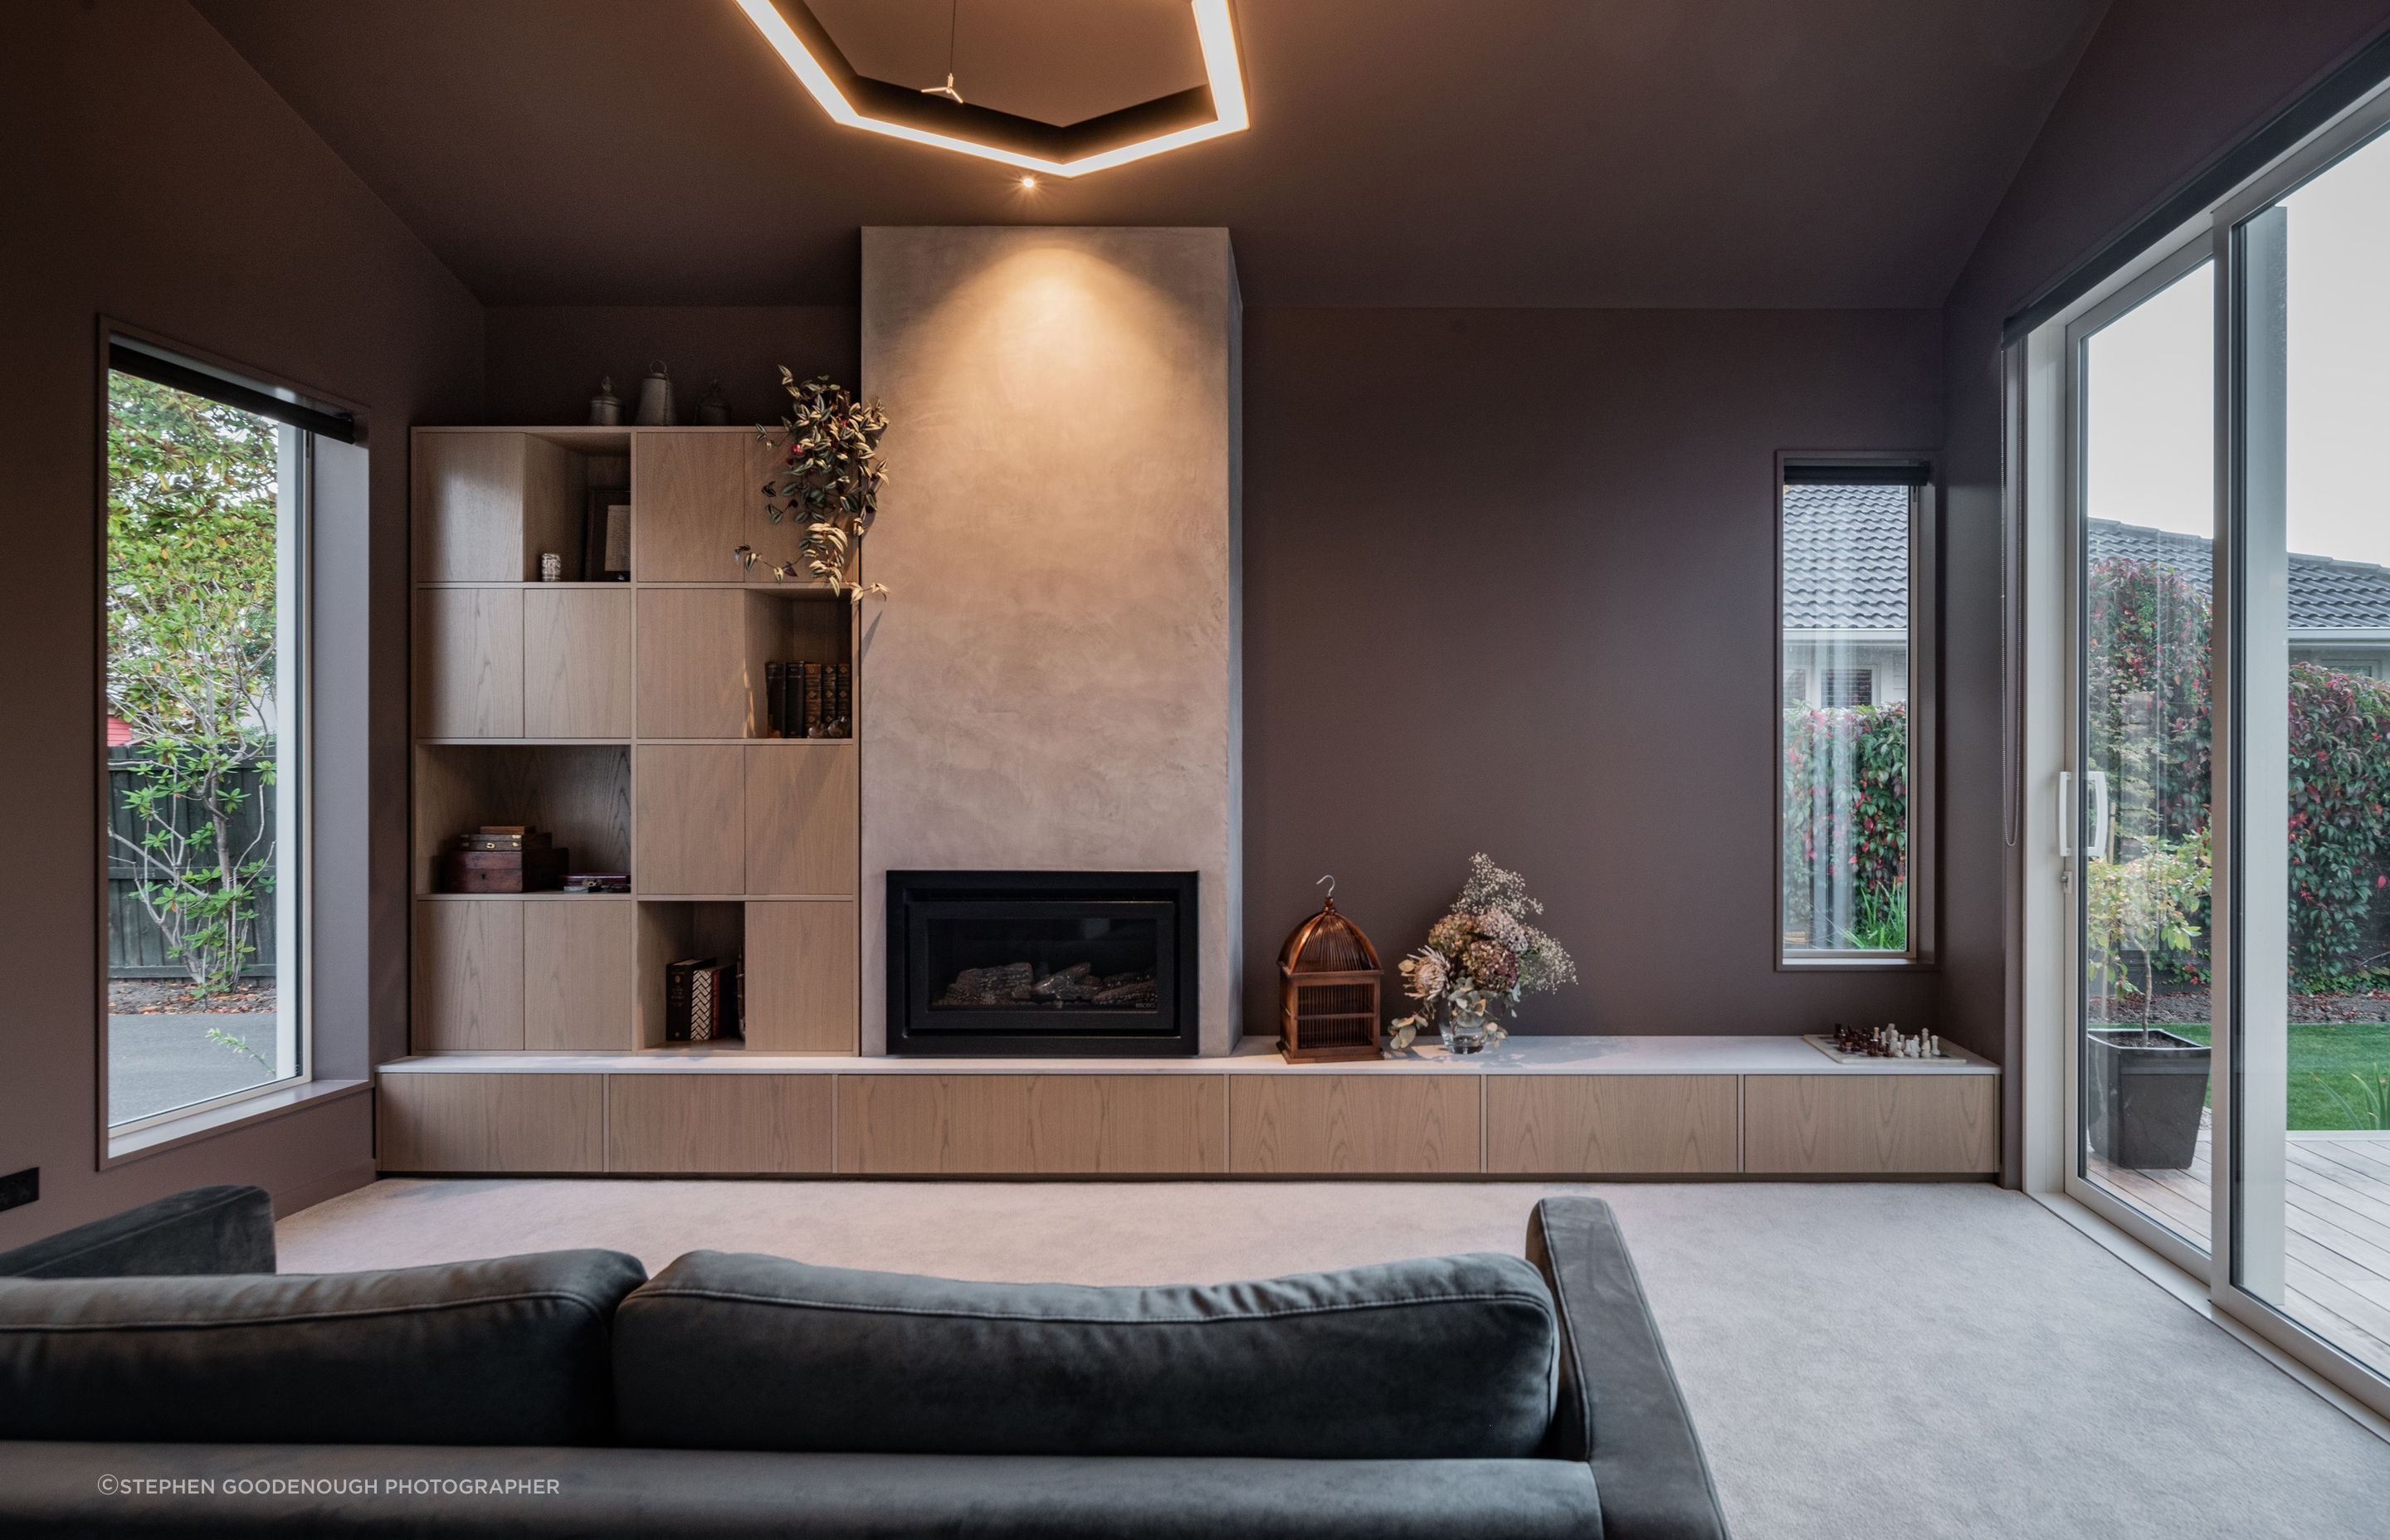 A separate living area features a fireplace and darker colour palette.